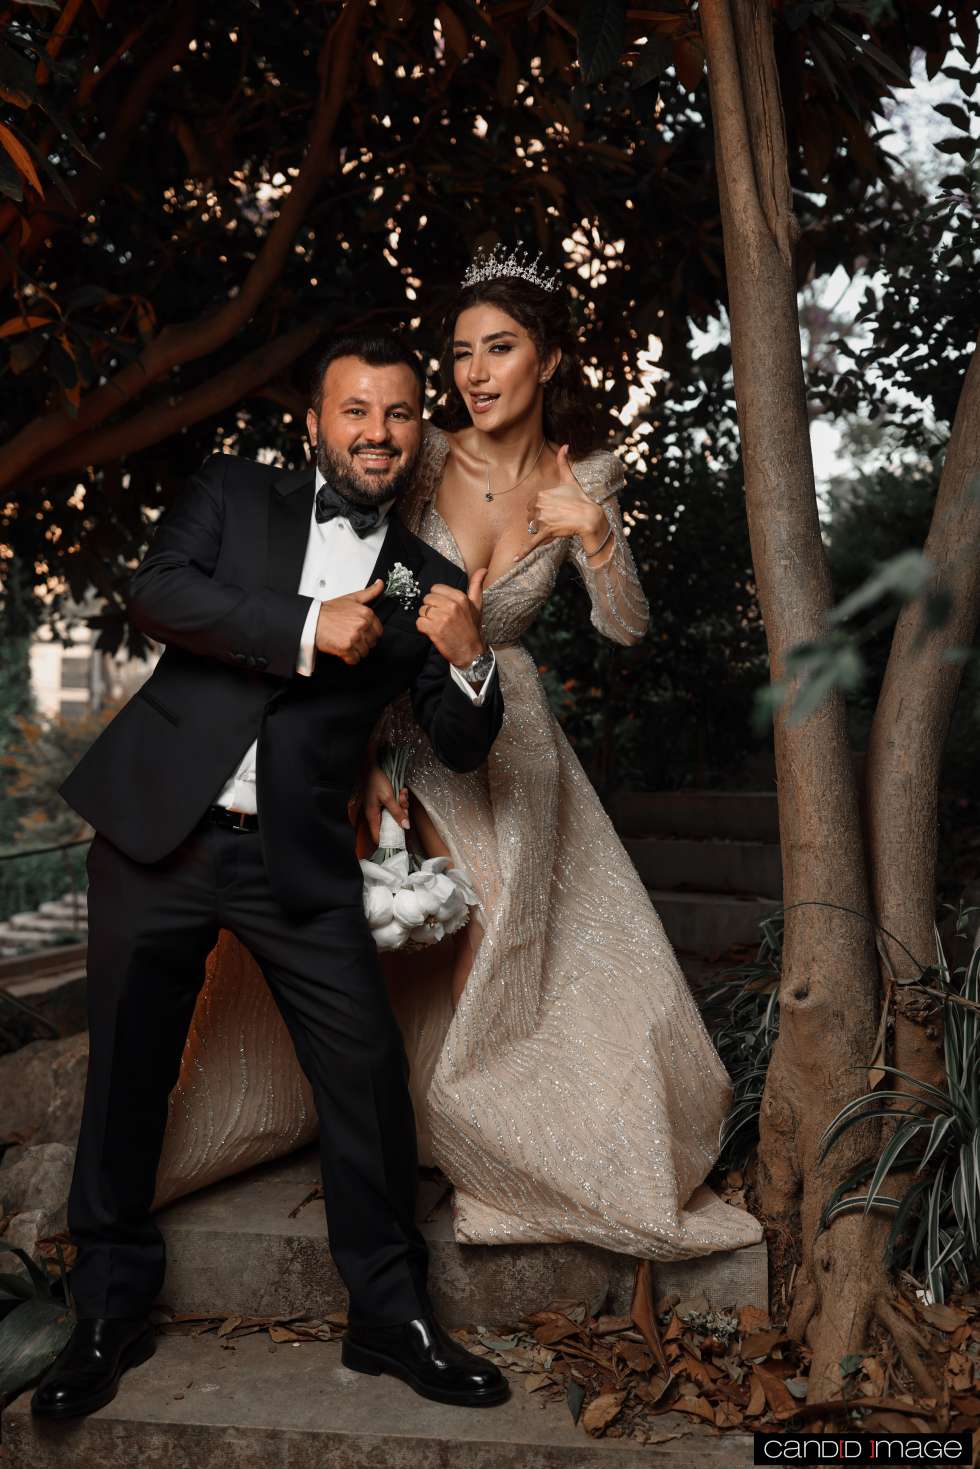 A Luxurious Gold and White Wedding in Lebanon